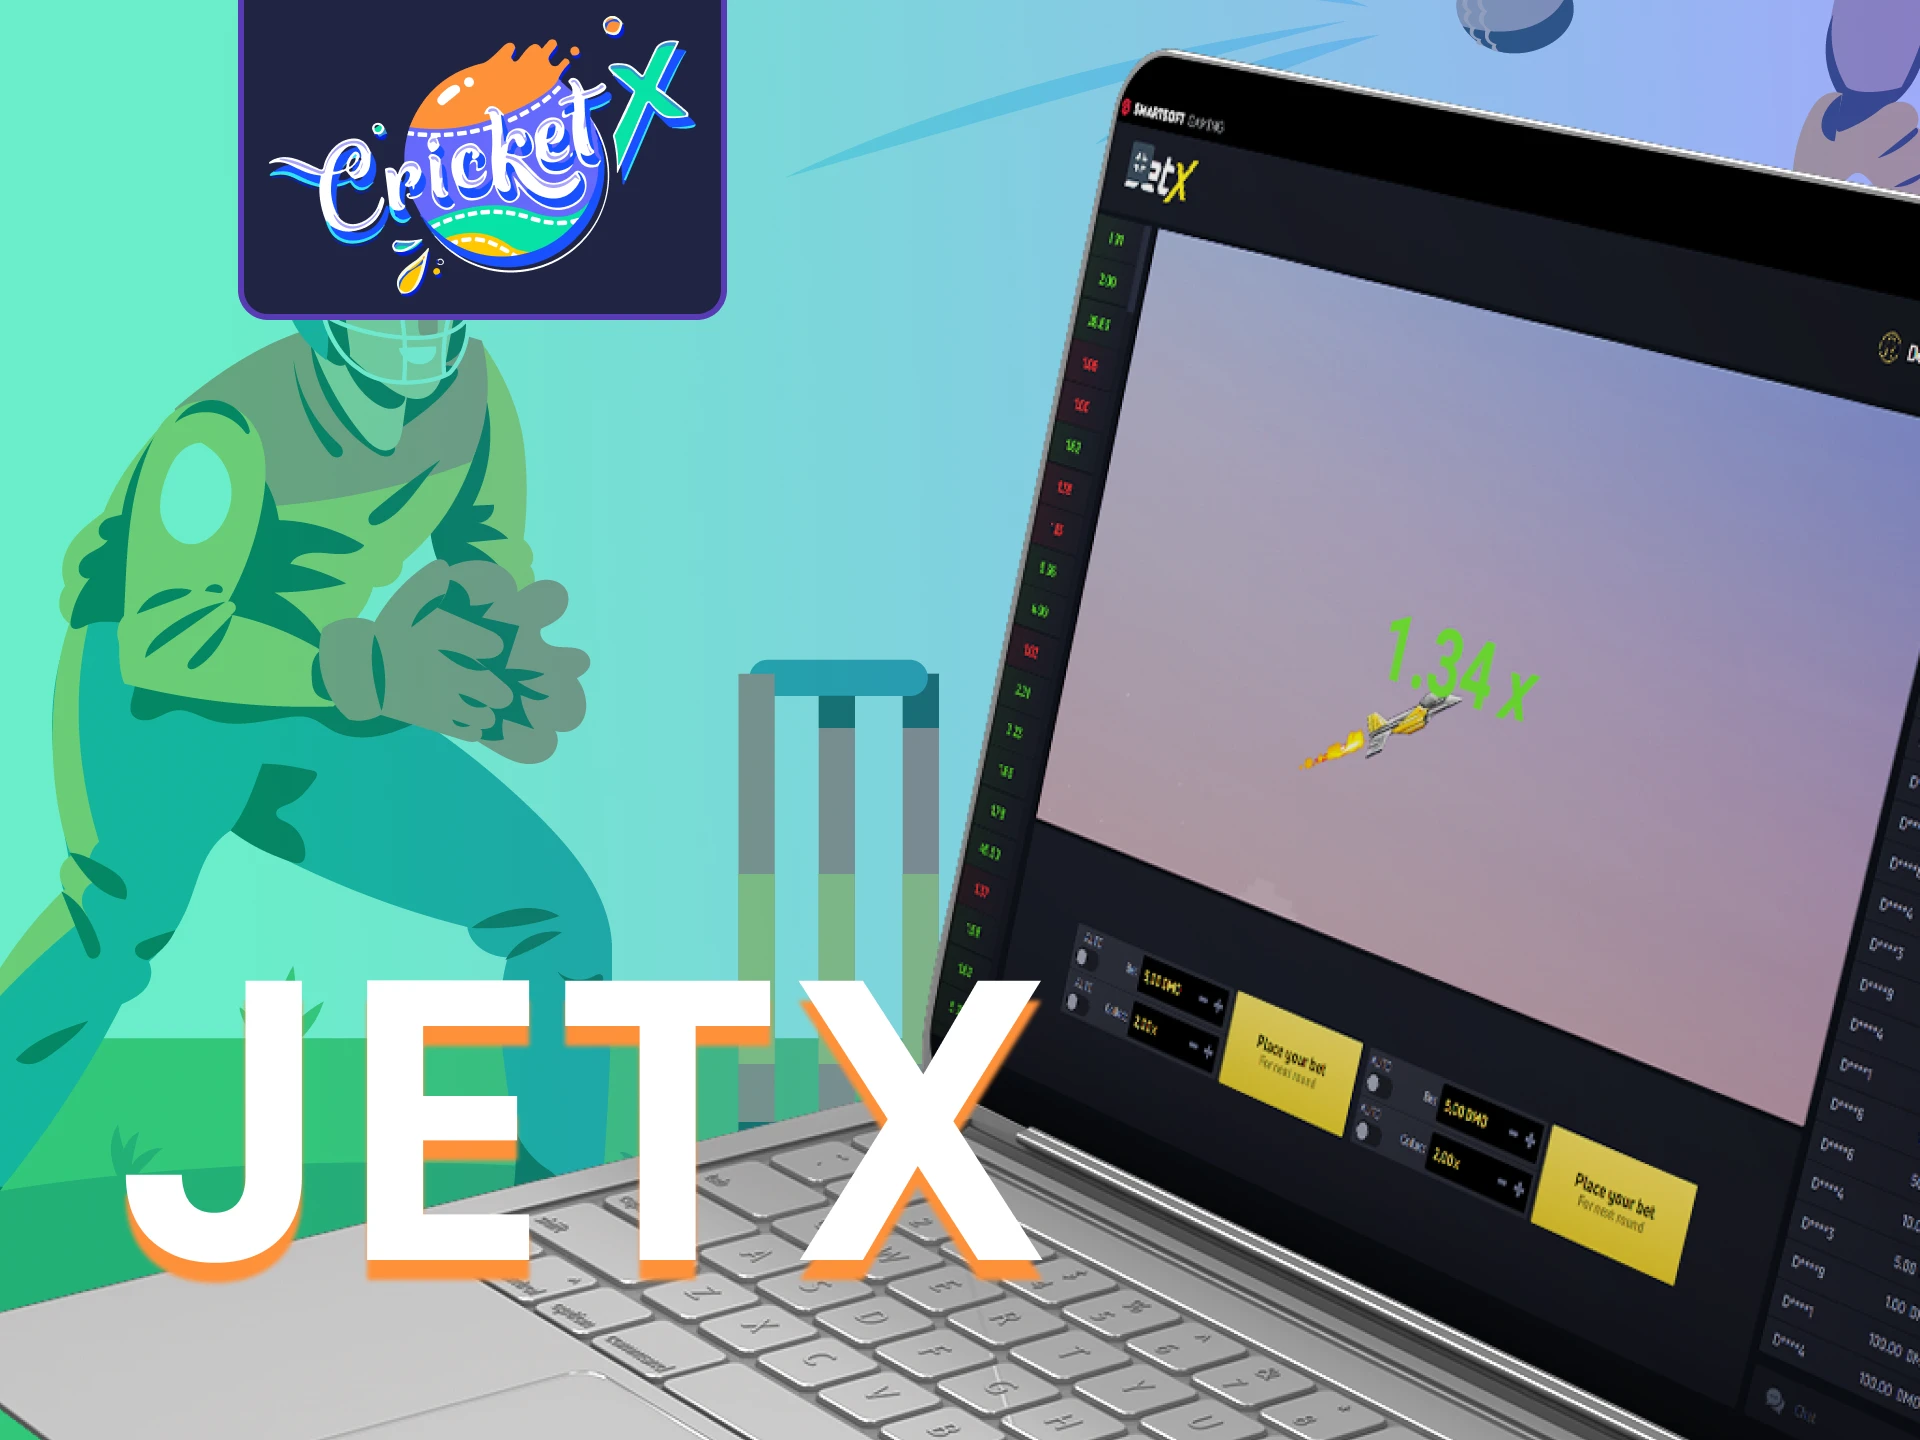 You can choose Jet X game from Smartsoft.